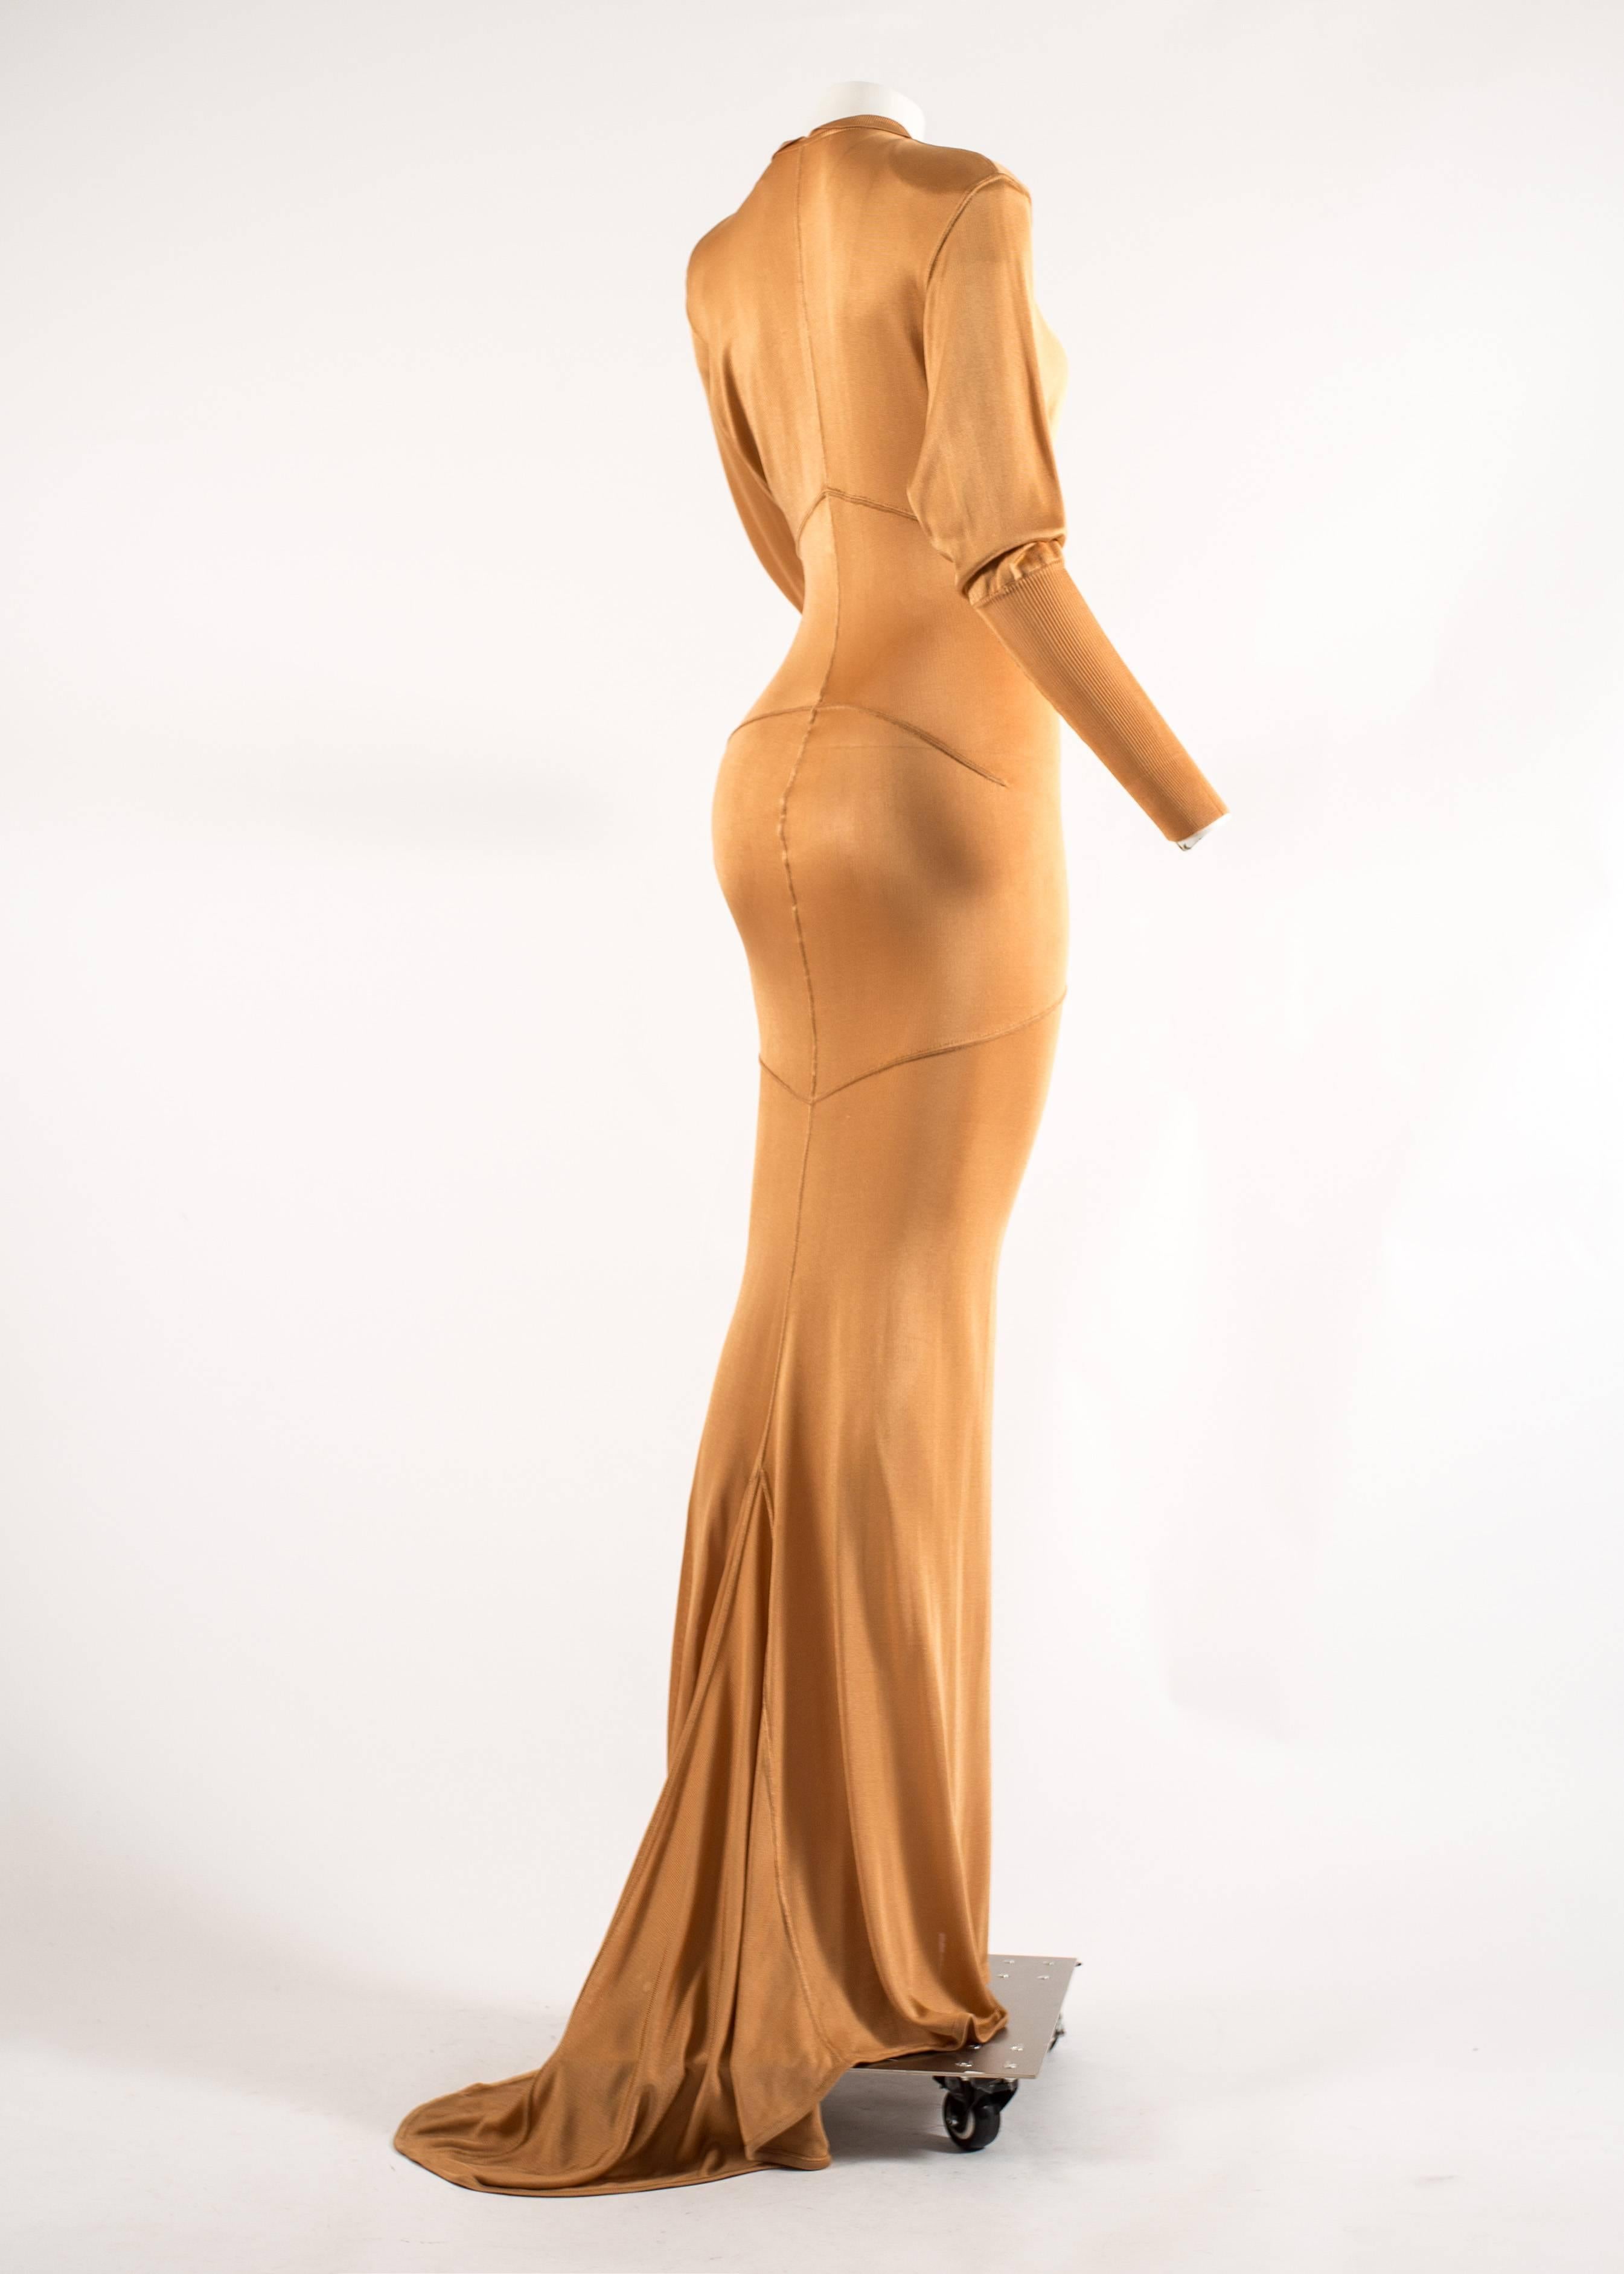 Women's Alaia Autumn-Winter 1986 apricot acetate knit evening gown with train